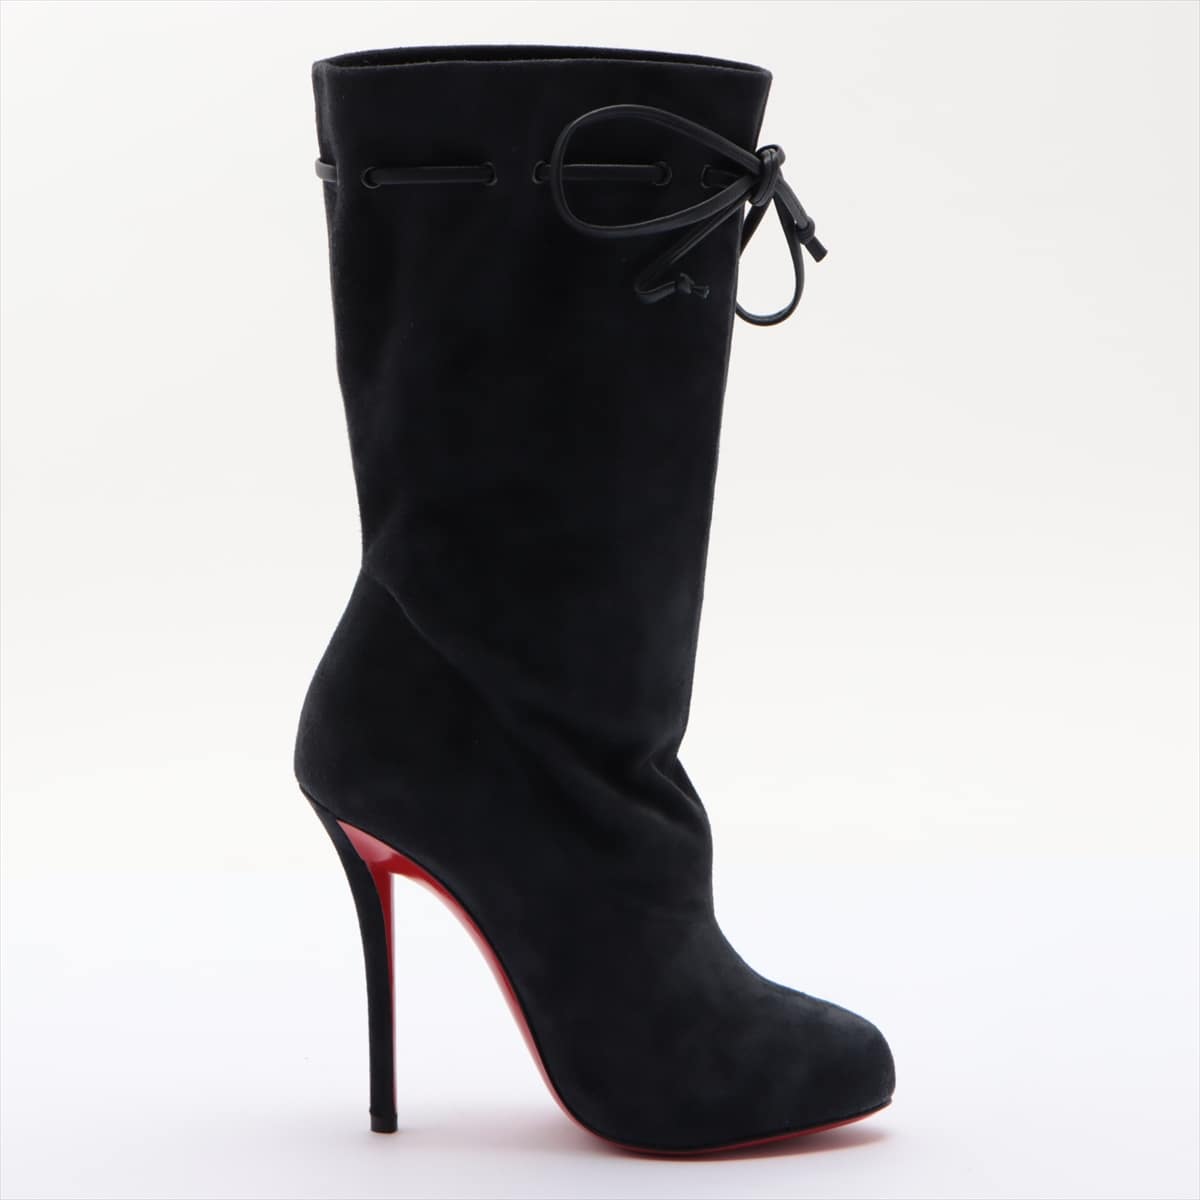 Christian Louboutin Suede Boots 35 1/2 Ladies' Navy blue Valentine 120mm 3150816